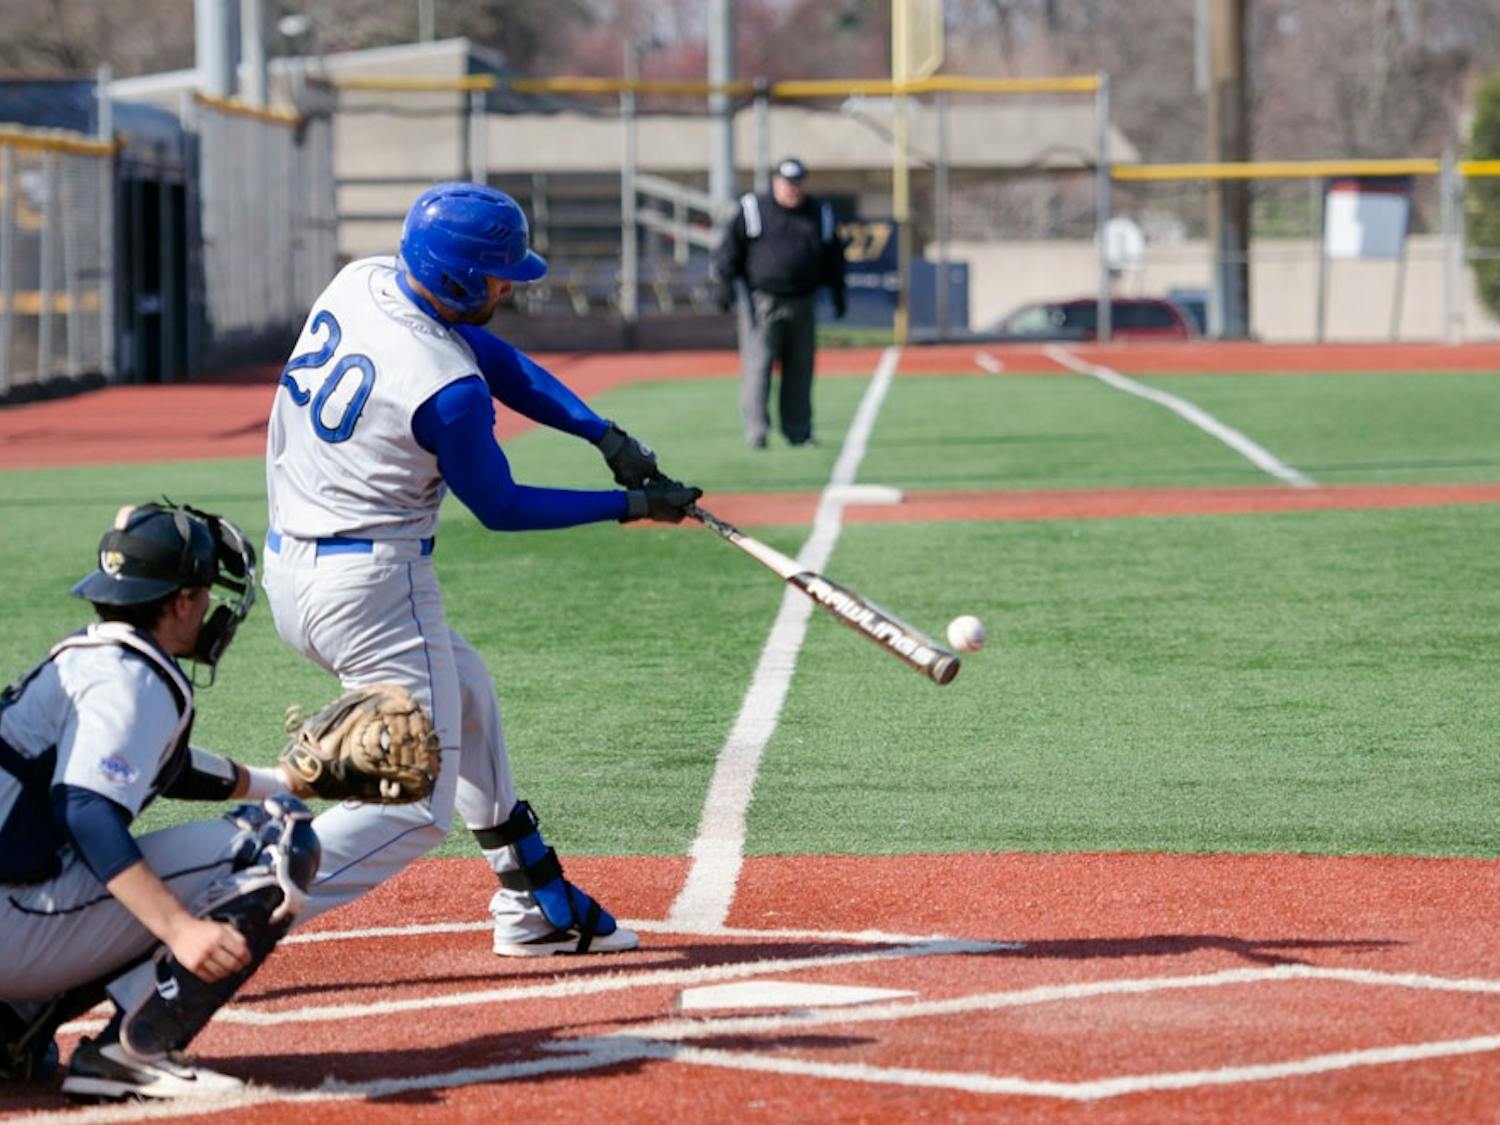 Senior outfielder Mike Abrunzo makes contact with an opponent’s pitch. The Bulls won two of their three games against Toledo - their first series in MAC play.